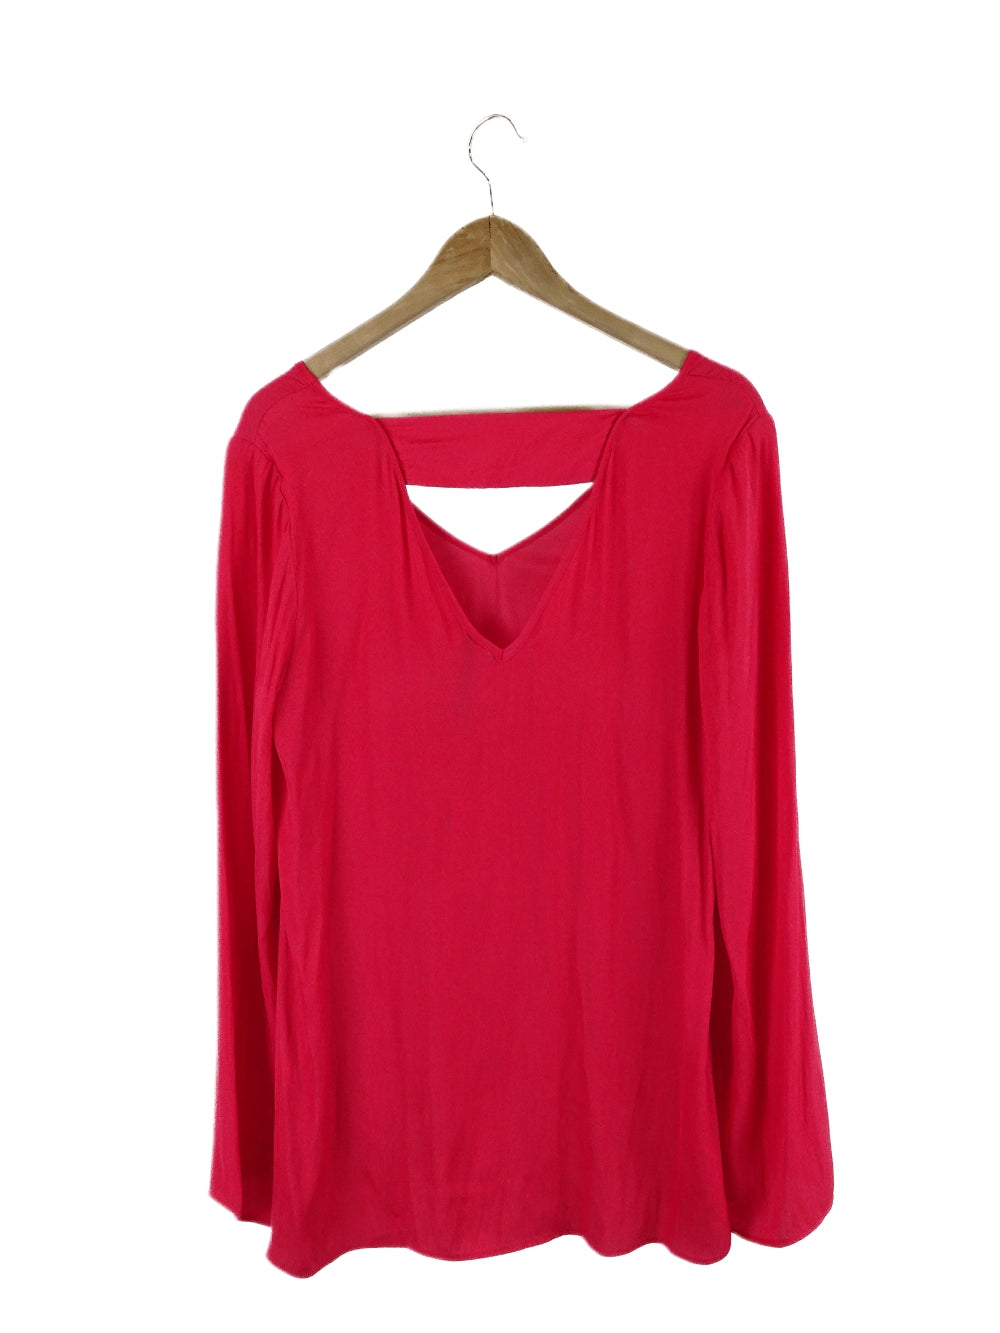 Luxe Deluxe Red Cut Out Top 12